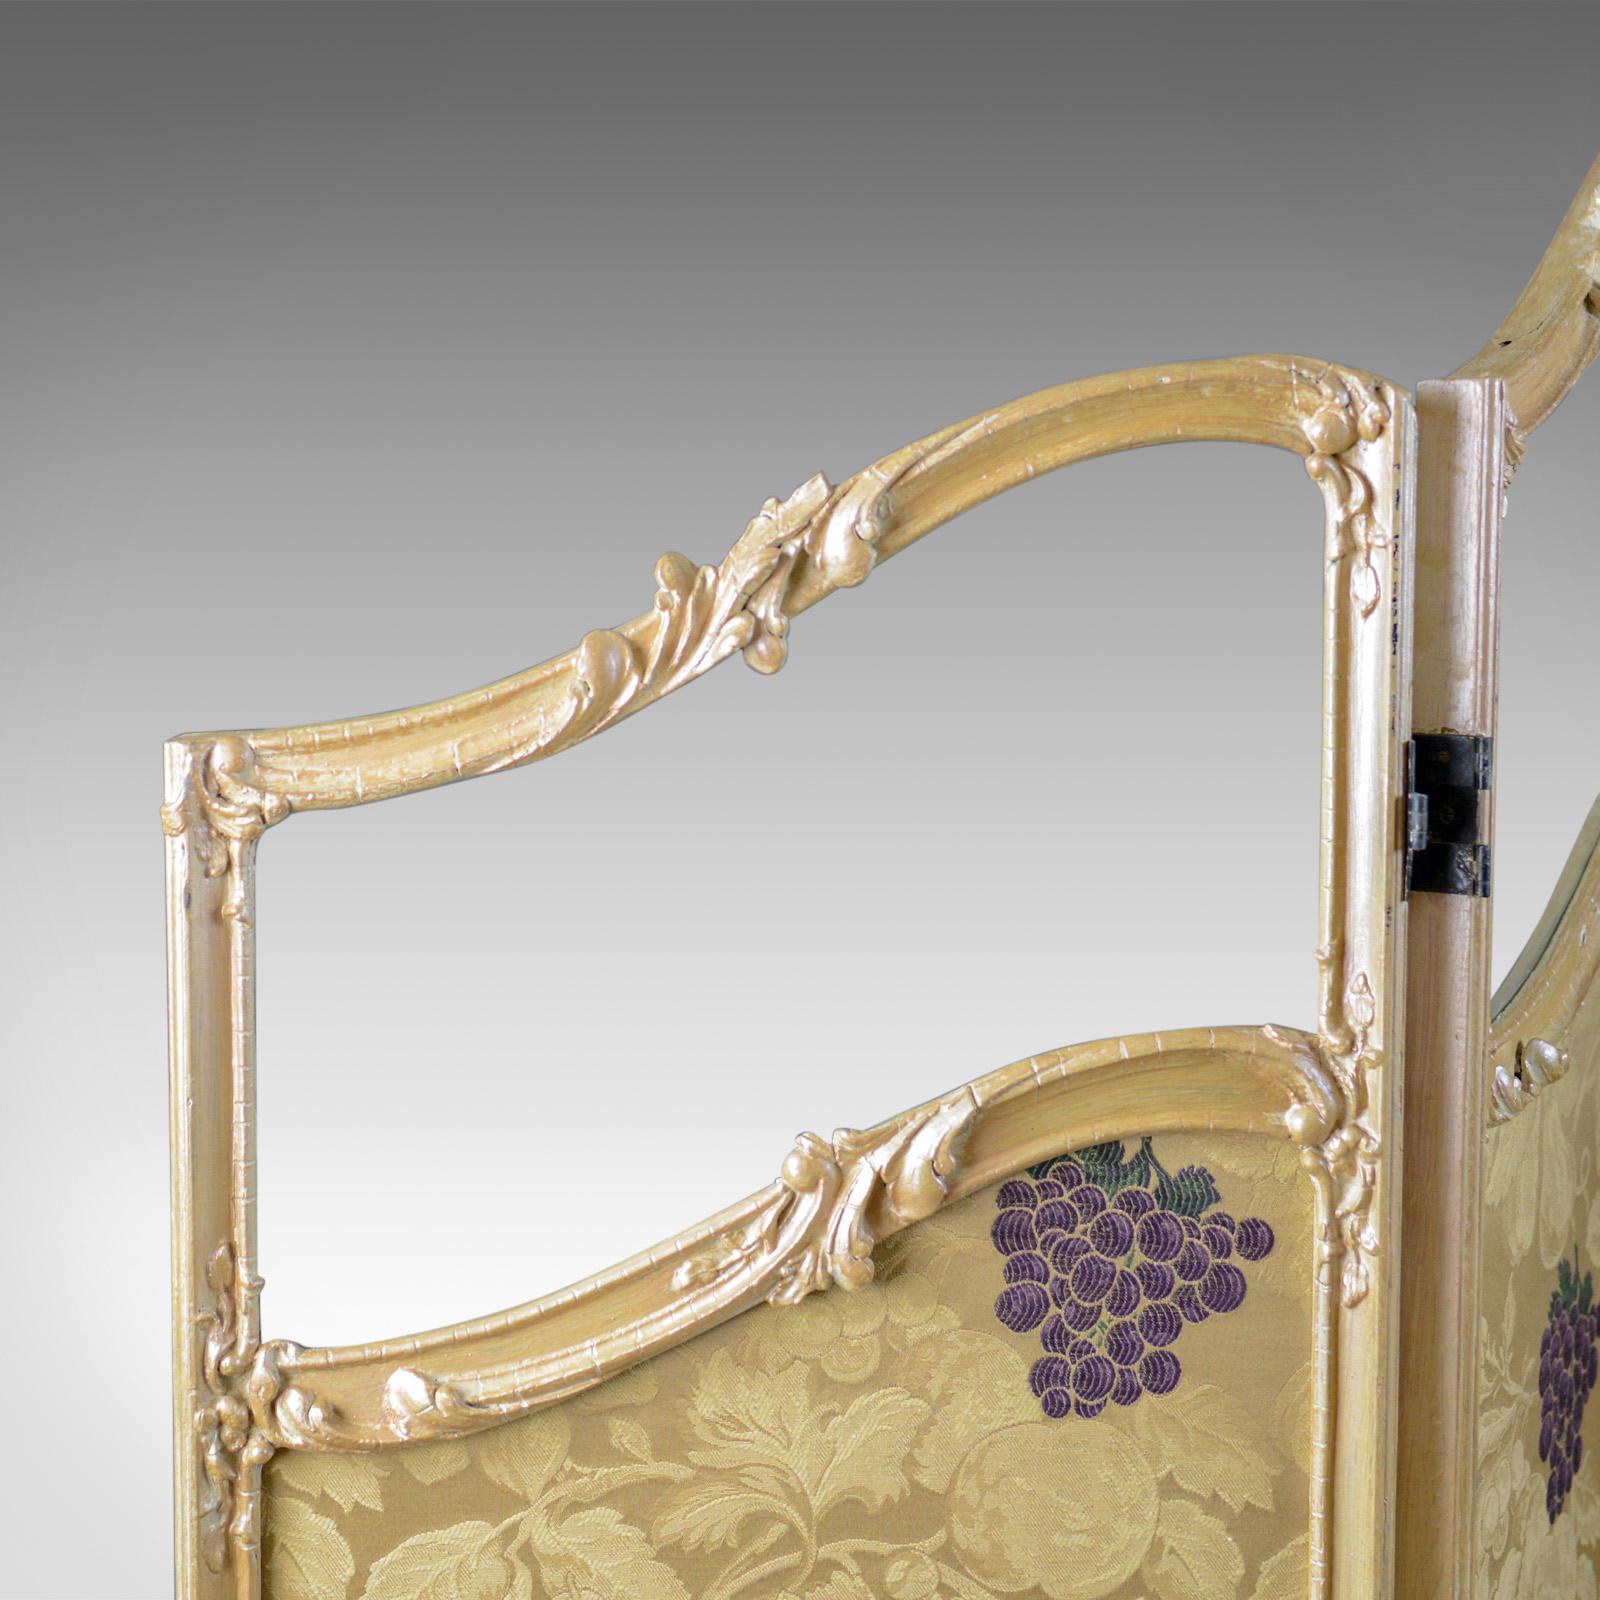 Victorian French Antique Folding Screen, Giltwood, Needlepoint, Room Divider, circa 1890